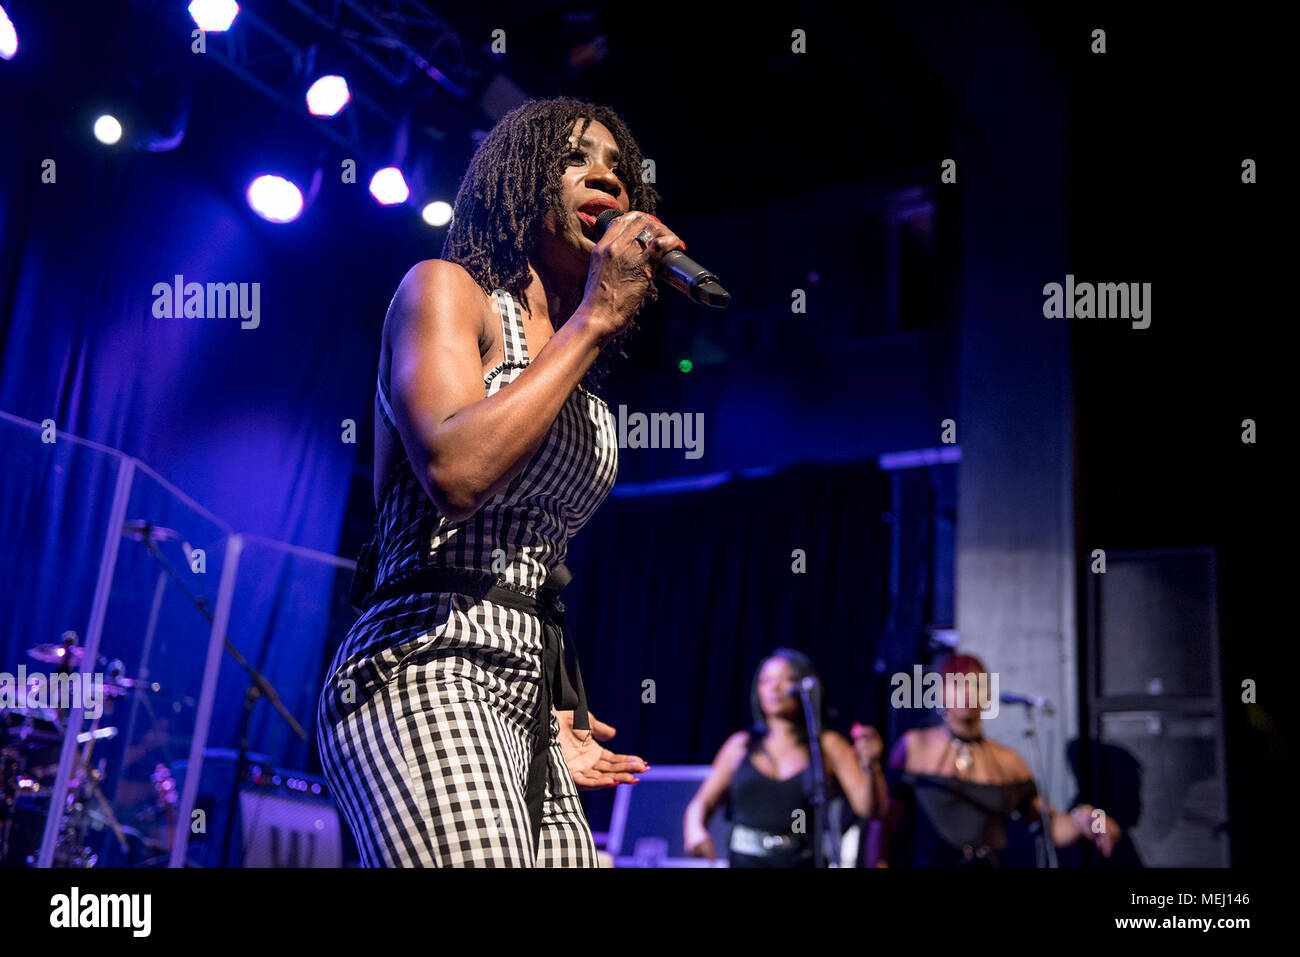 Manchester, UK. 22nd April 2018. Heather Small, Voice of M People performs at Manchester Academy 2 22/04/2018 Stock Photo